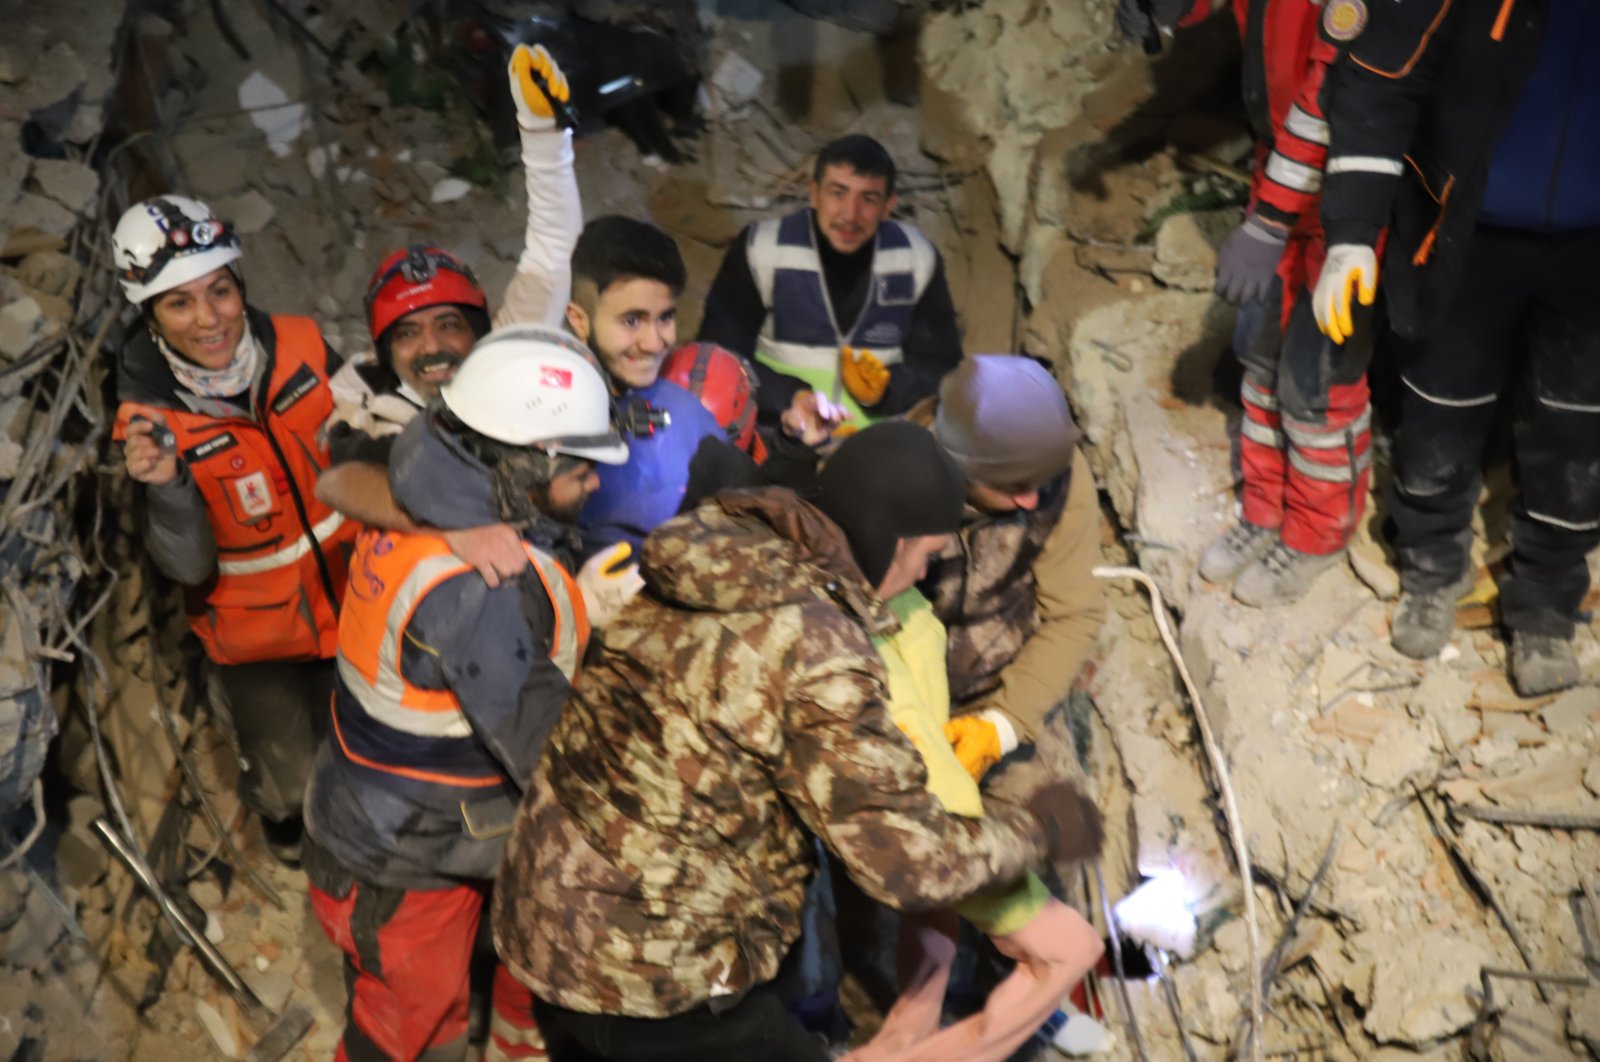 Rescue crews assist a smiling Adnan Korkut as he is pulled from the rubble, in Gaziantep, southern Türkiye, Feb. 10, 2023. (İHA Photo)